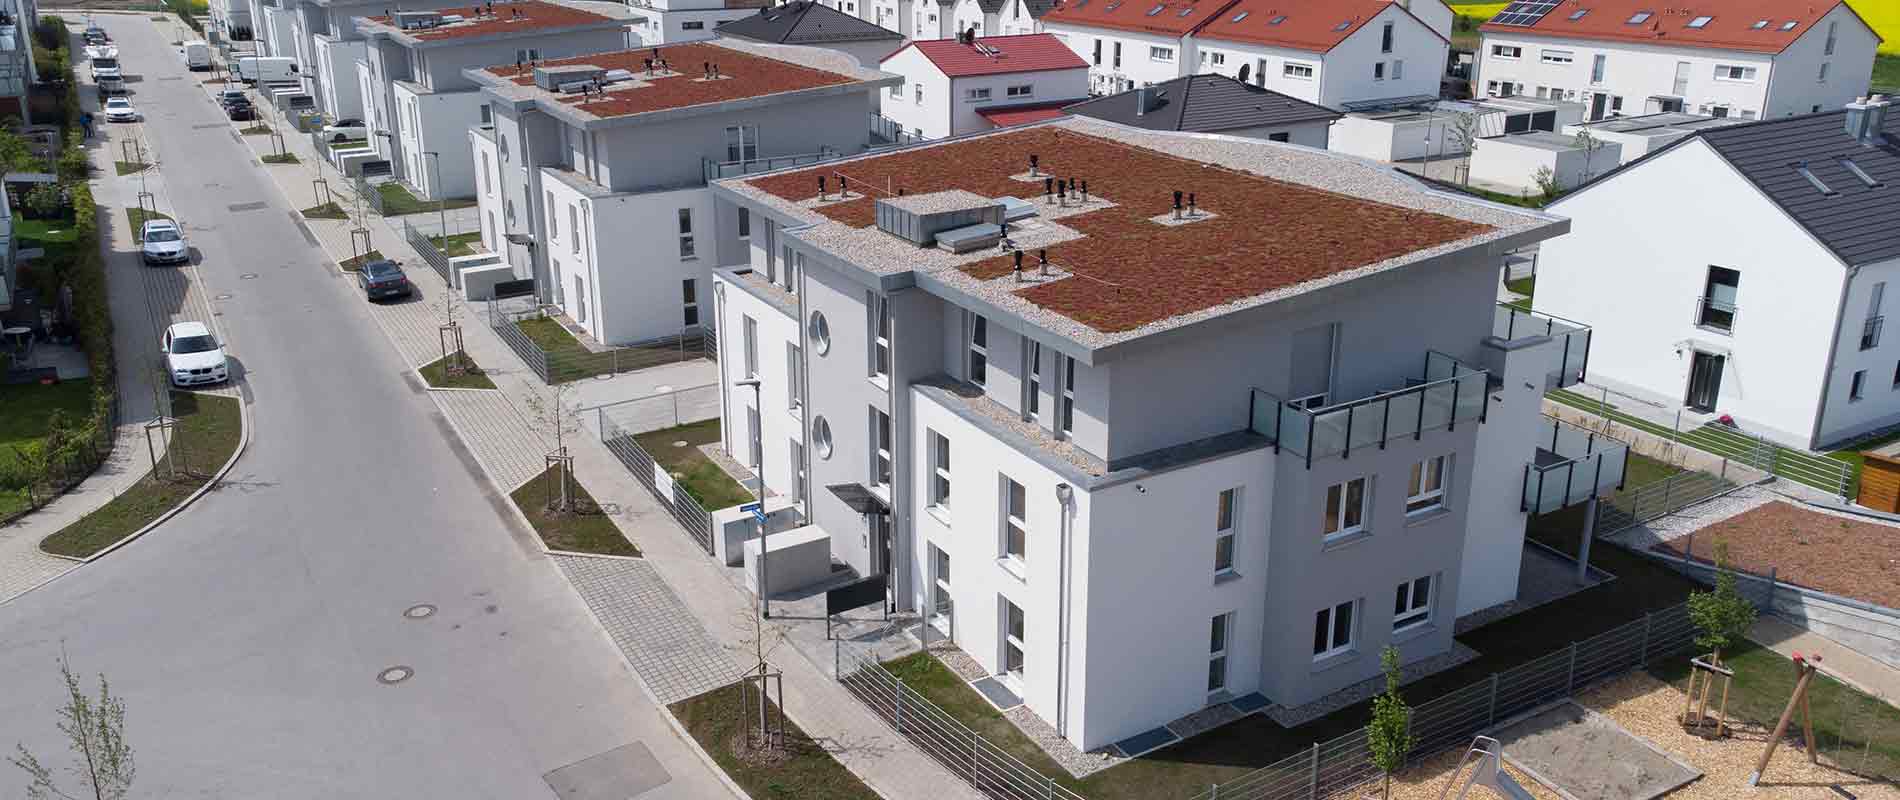 In a modern housing estate, there are several residential buildings with flat roofs next to each other, which were built identically. In the background, you can see different apartment buildings.